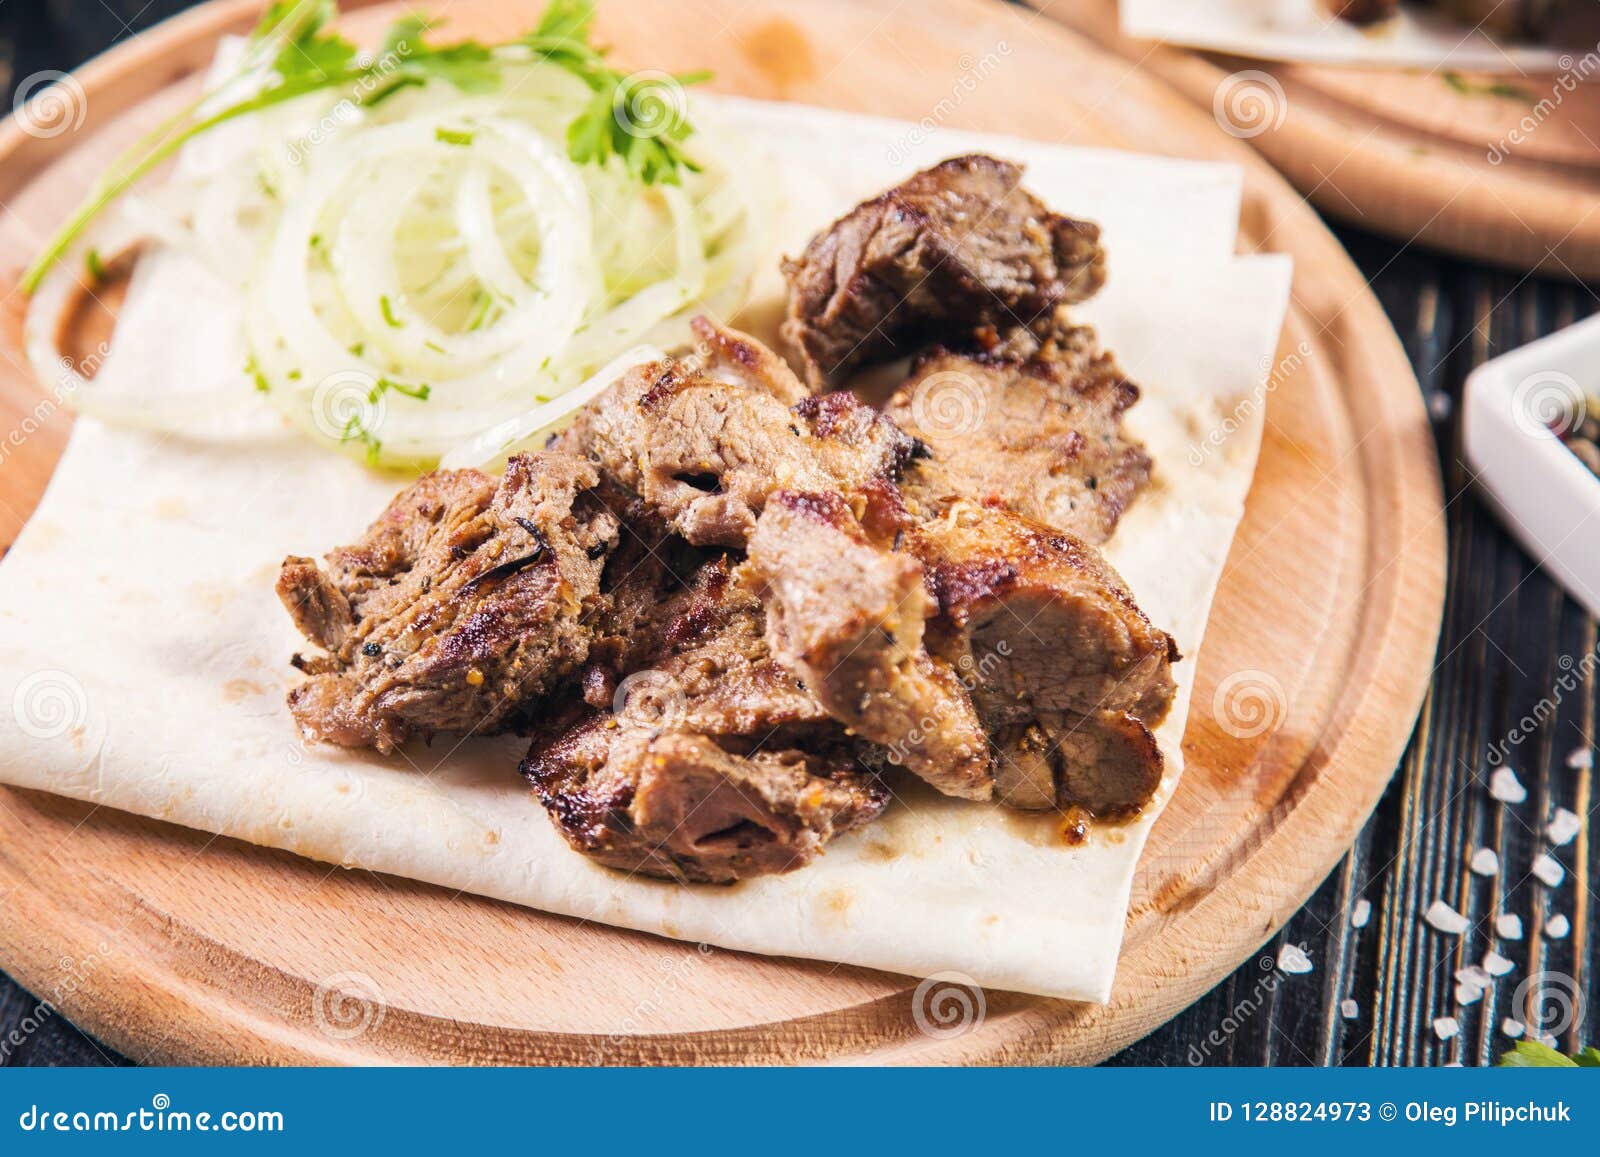 Grilled meat with onion stock image. Image of event - 128824973